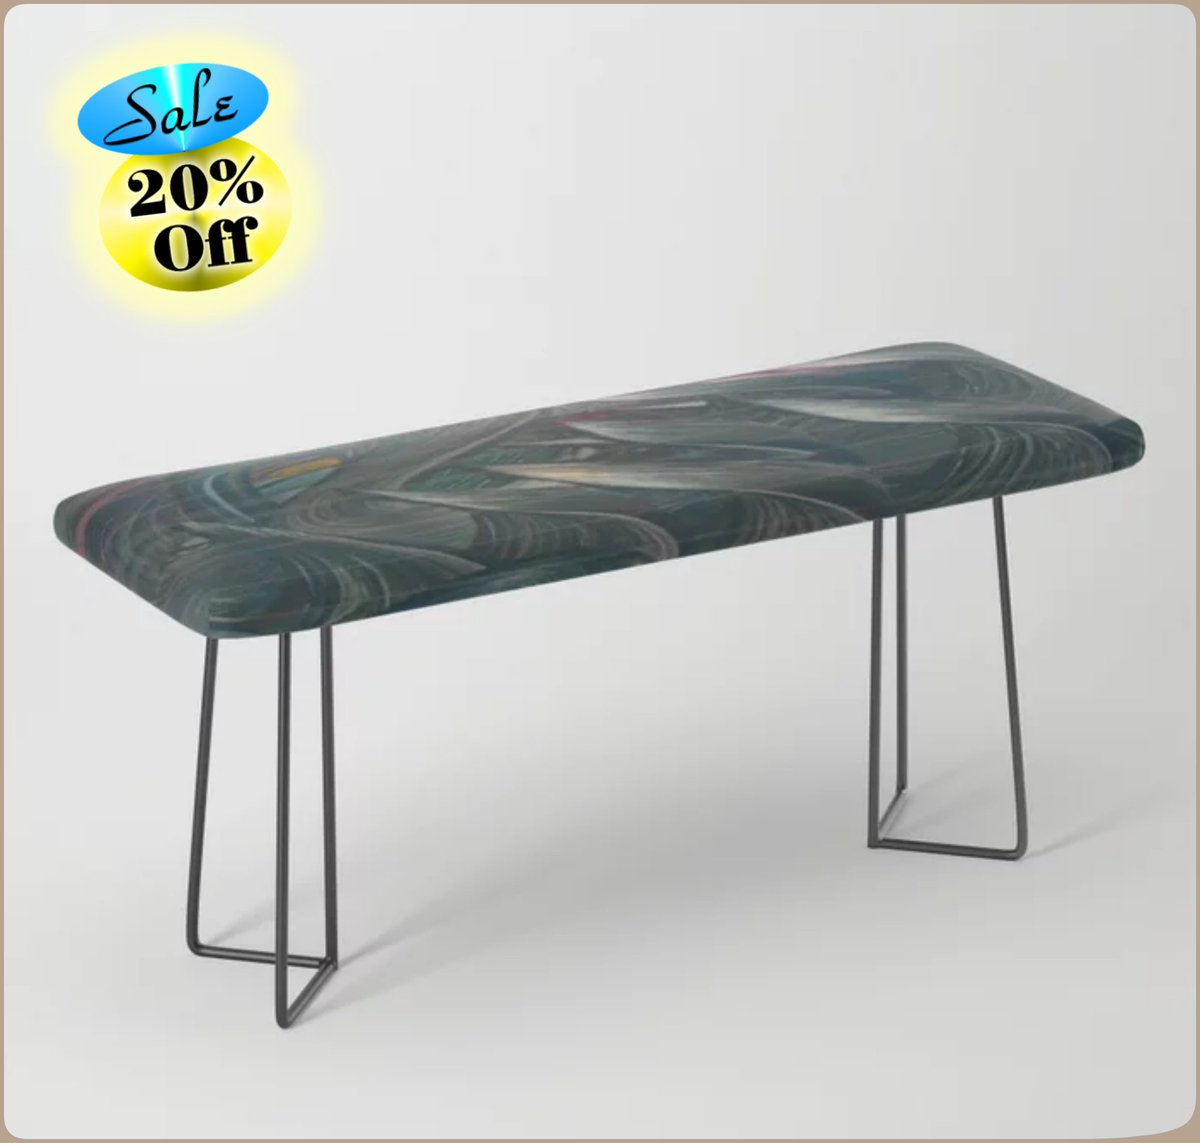 *SALE 20% Off*
Eunomia Bench~by Art Falaxy~
~Unique Home Decor~
#artfalaxy #art #furniture #tables #homedecor #society6 #modern #accents #interior #trendy #credenza #dressers #stools #coffee

society6.com/product/eunomi…
COLLECTION: society6.com/art/eunomia?cu…